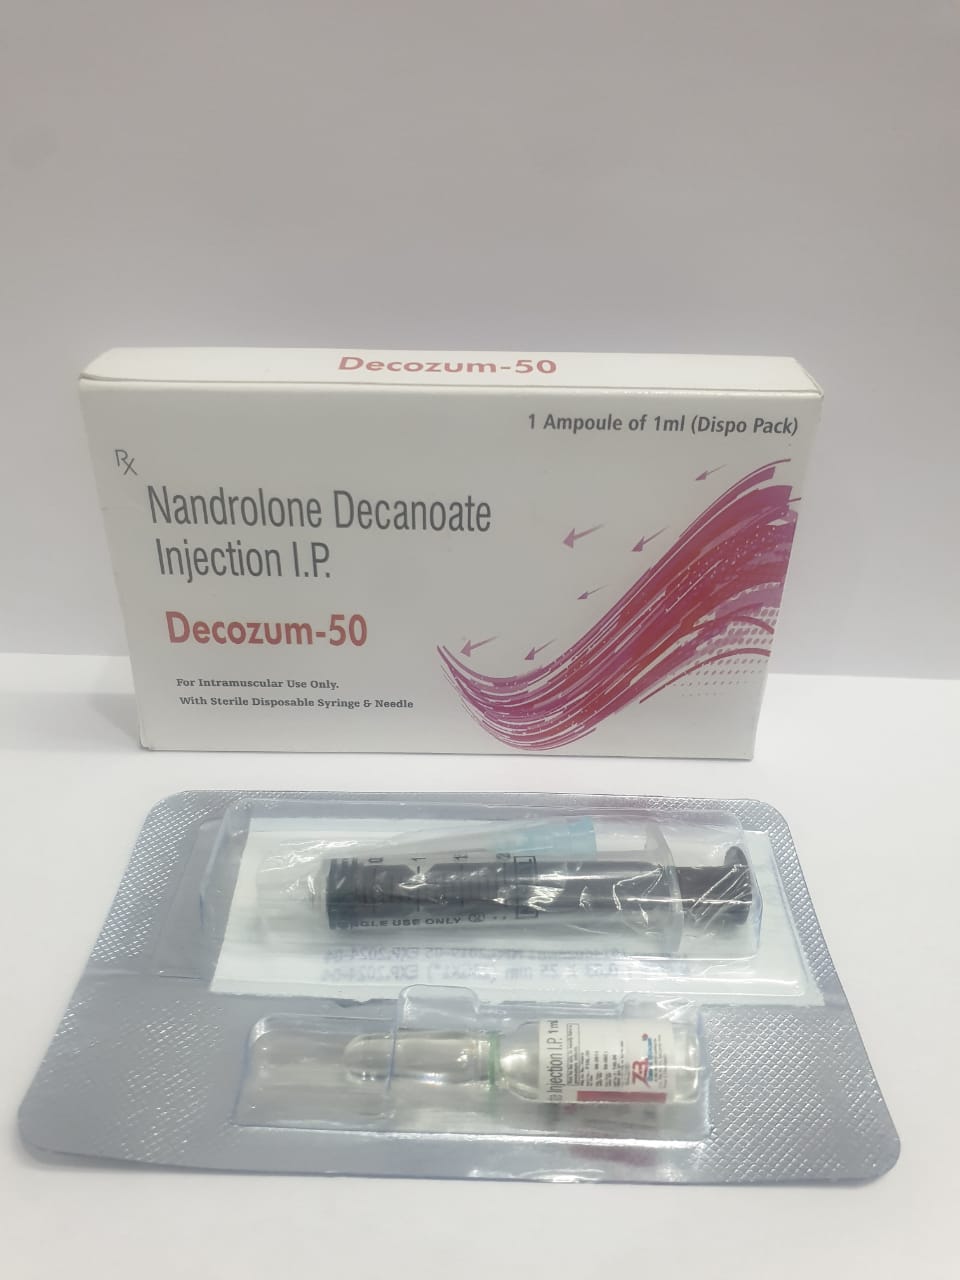 Product Name: Decozum 50, Compositions of Decozum 50 are Nandrolone Decanoate Injection IP - Zumax Biocare